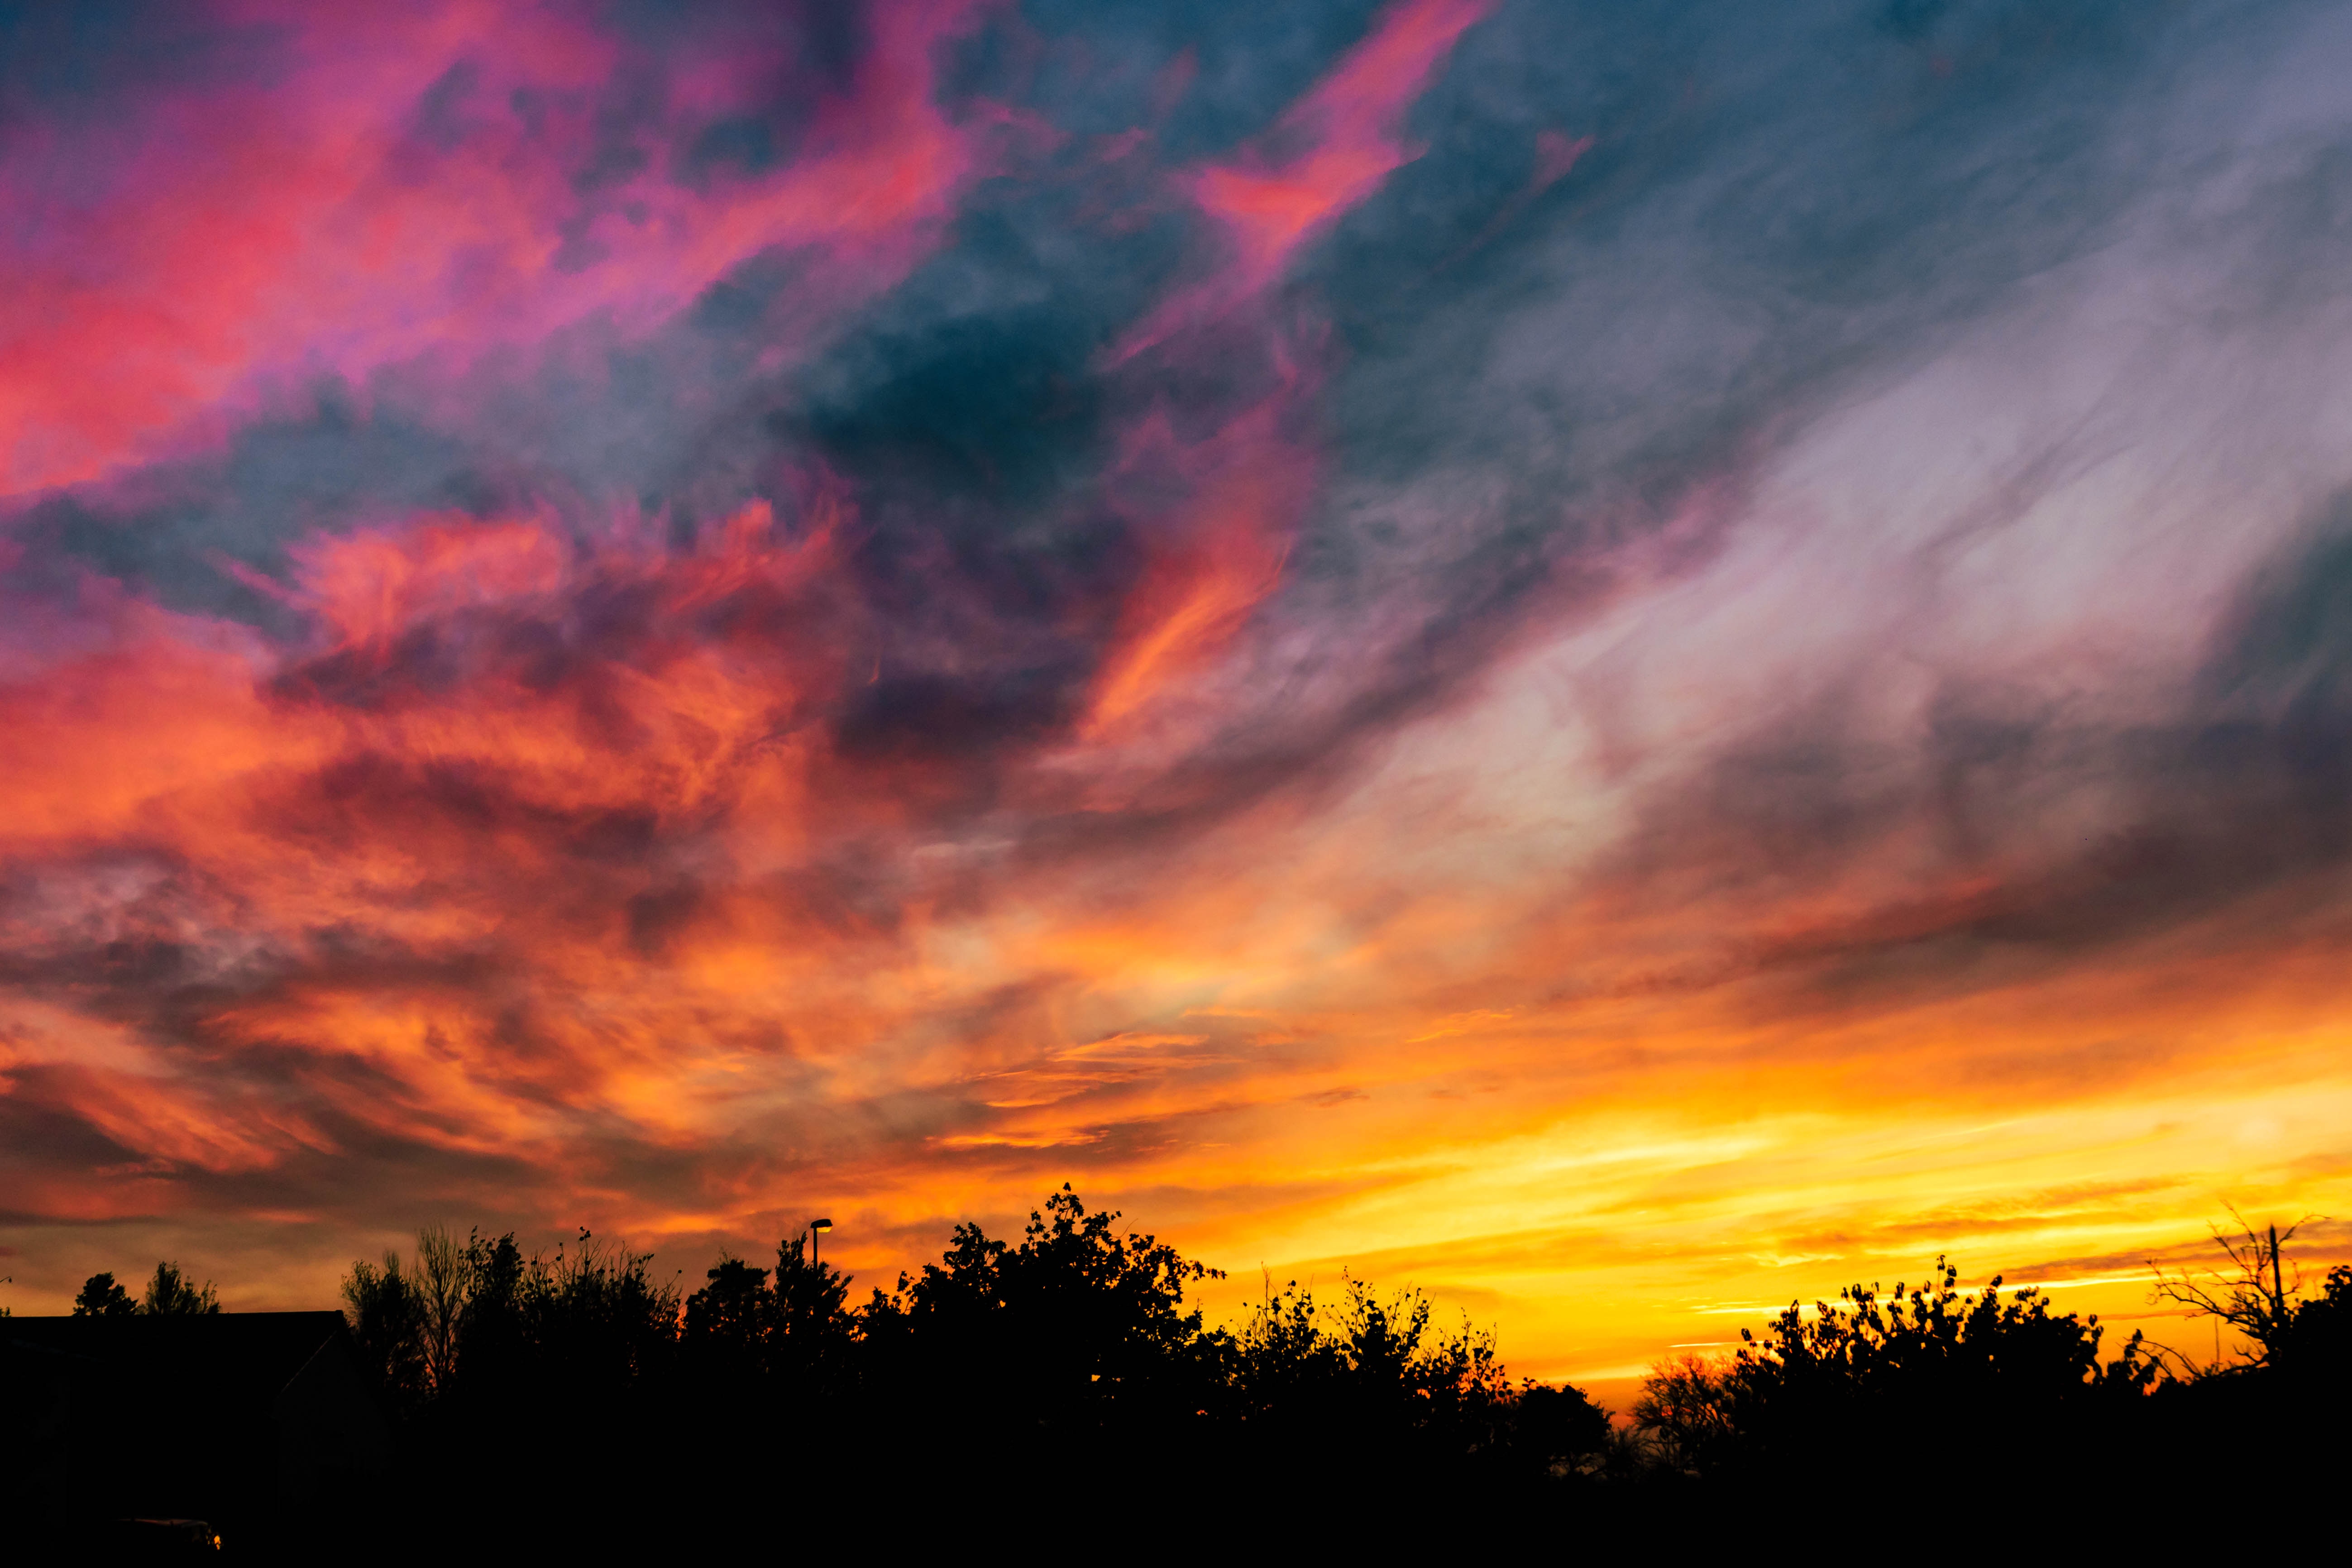 Download wallpaper 5196x3464 sunset, sky, trees, colorful HD